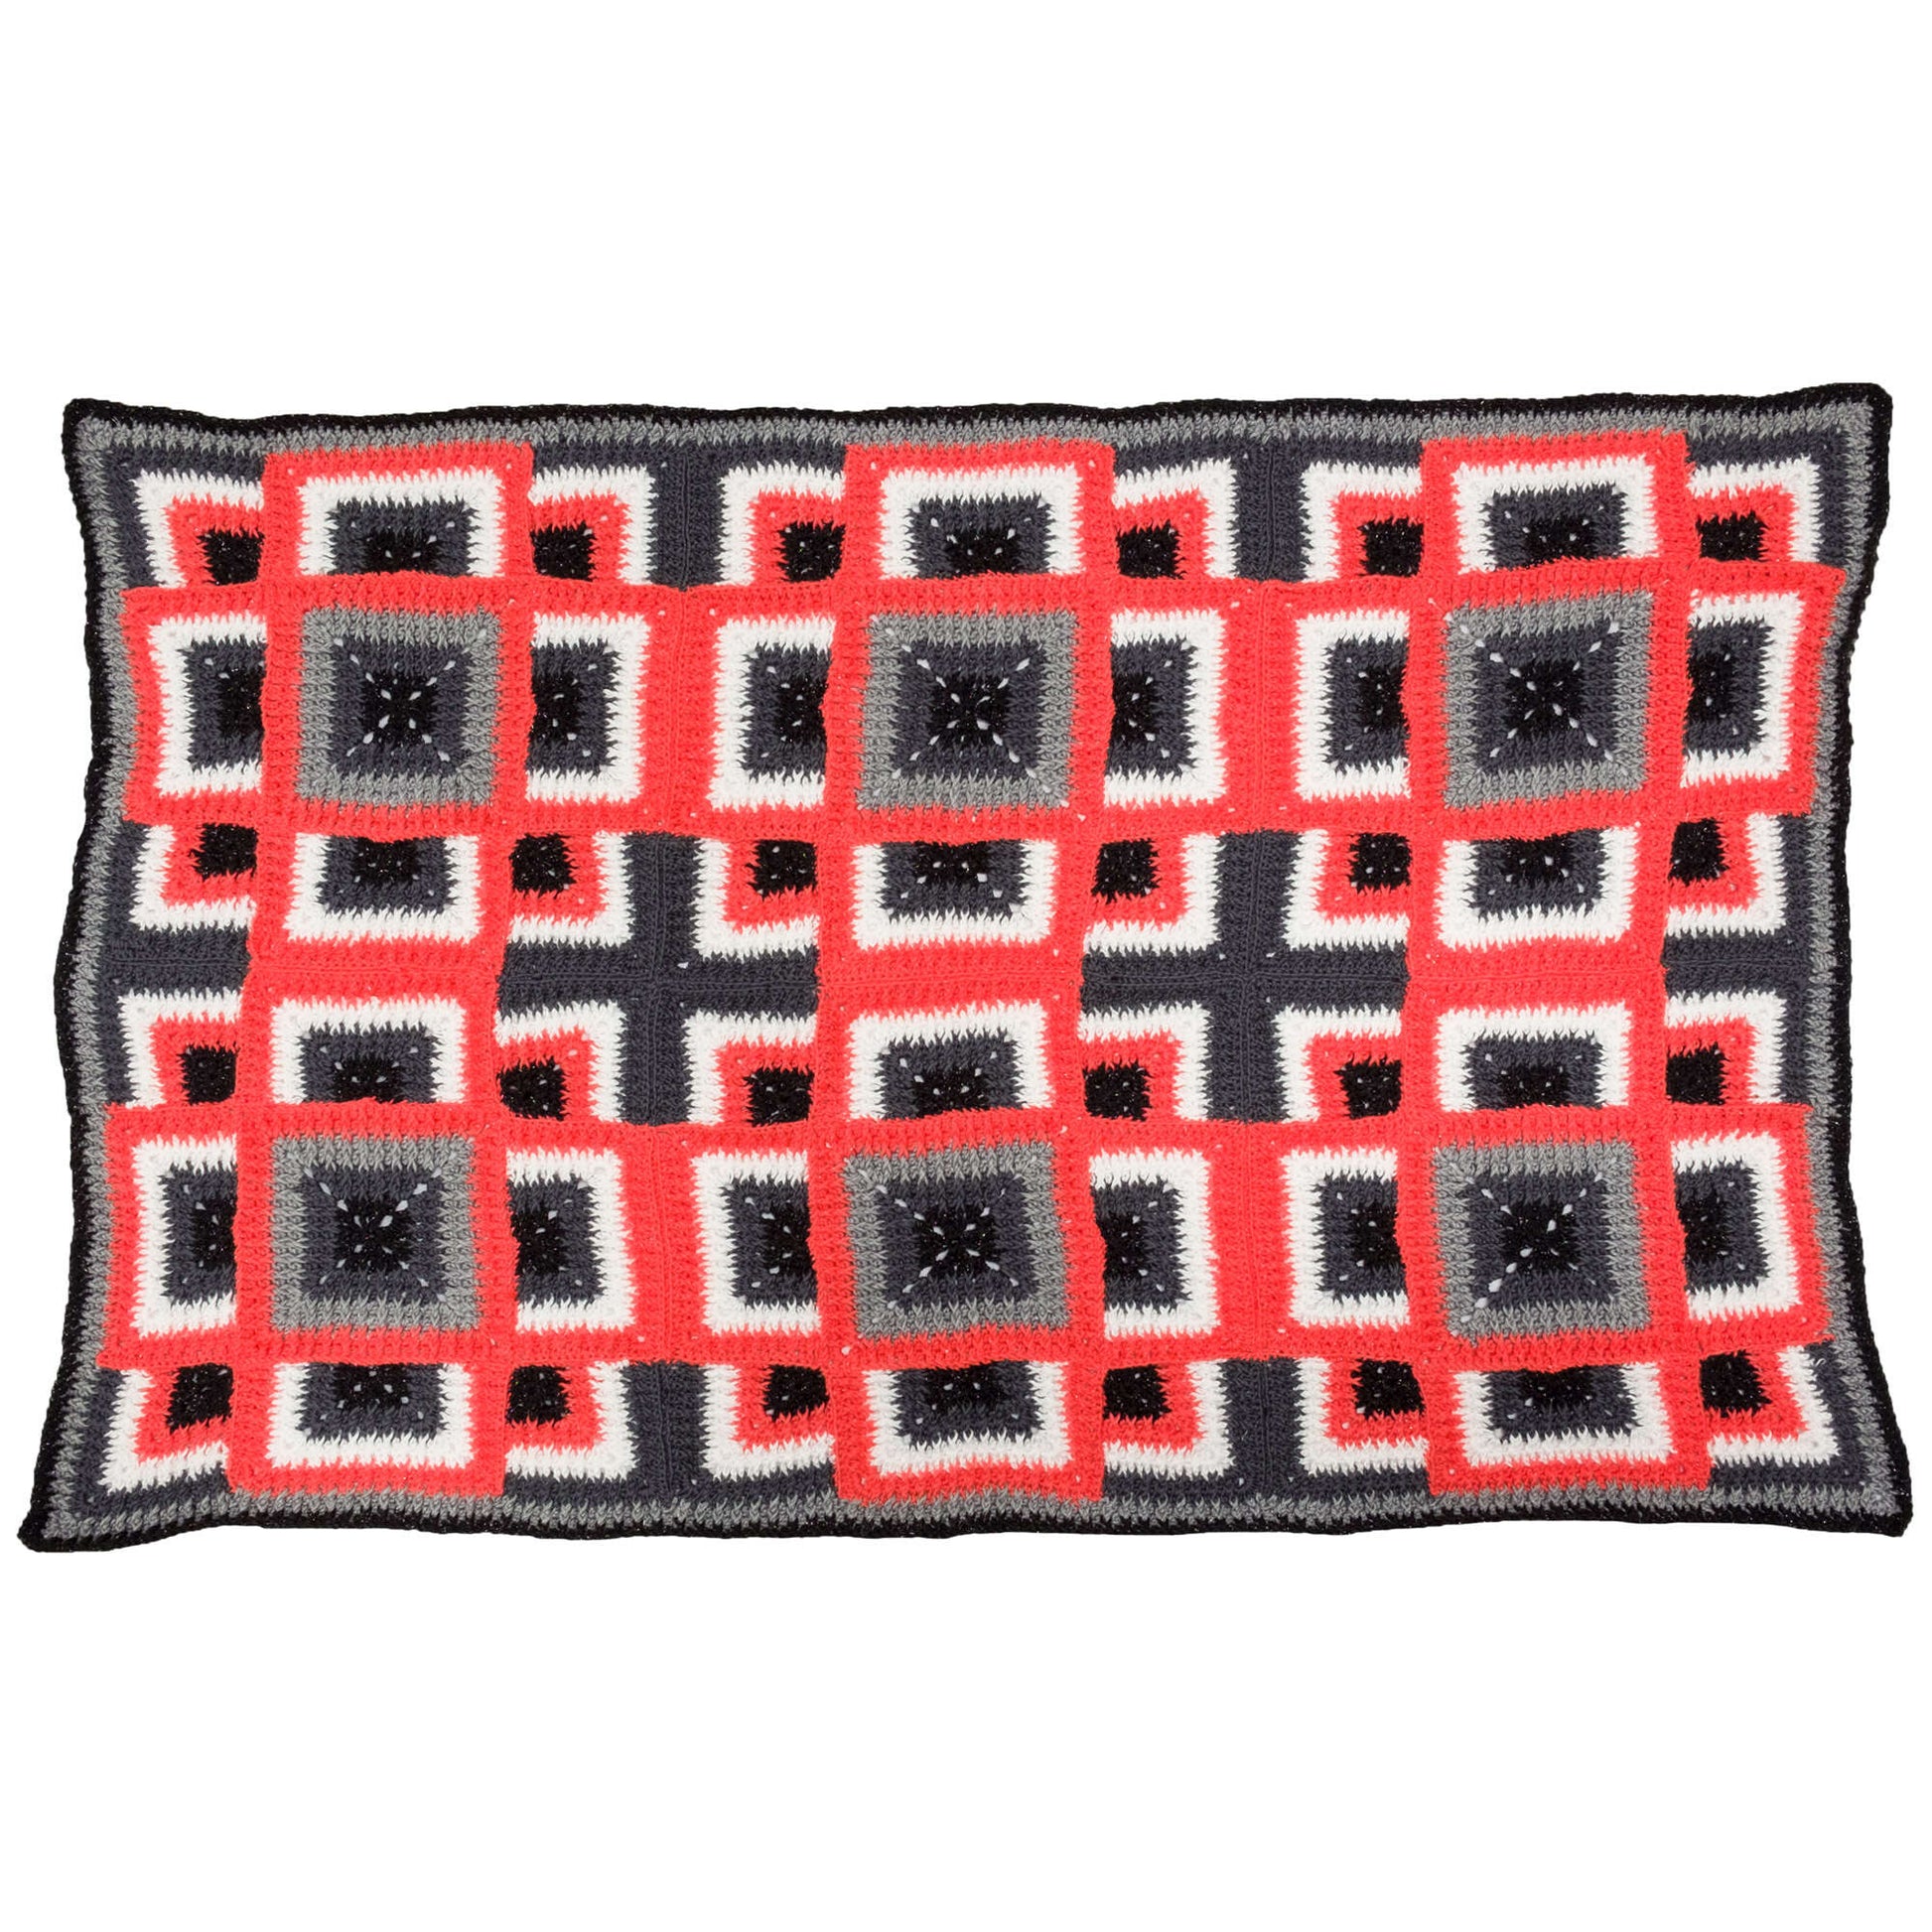 Free Red Heart Crochet Dynamic Squares Throw Pattern